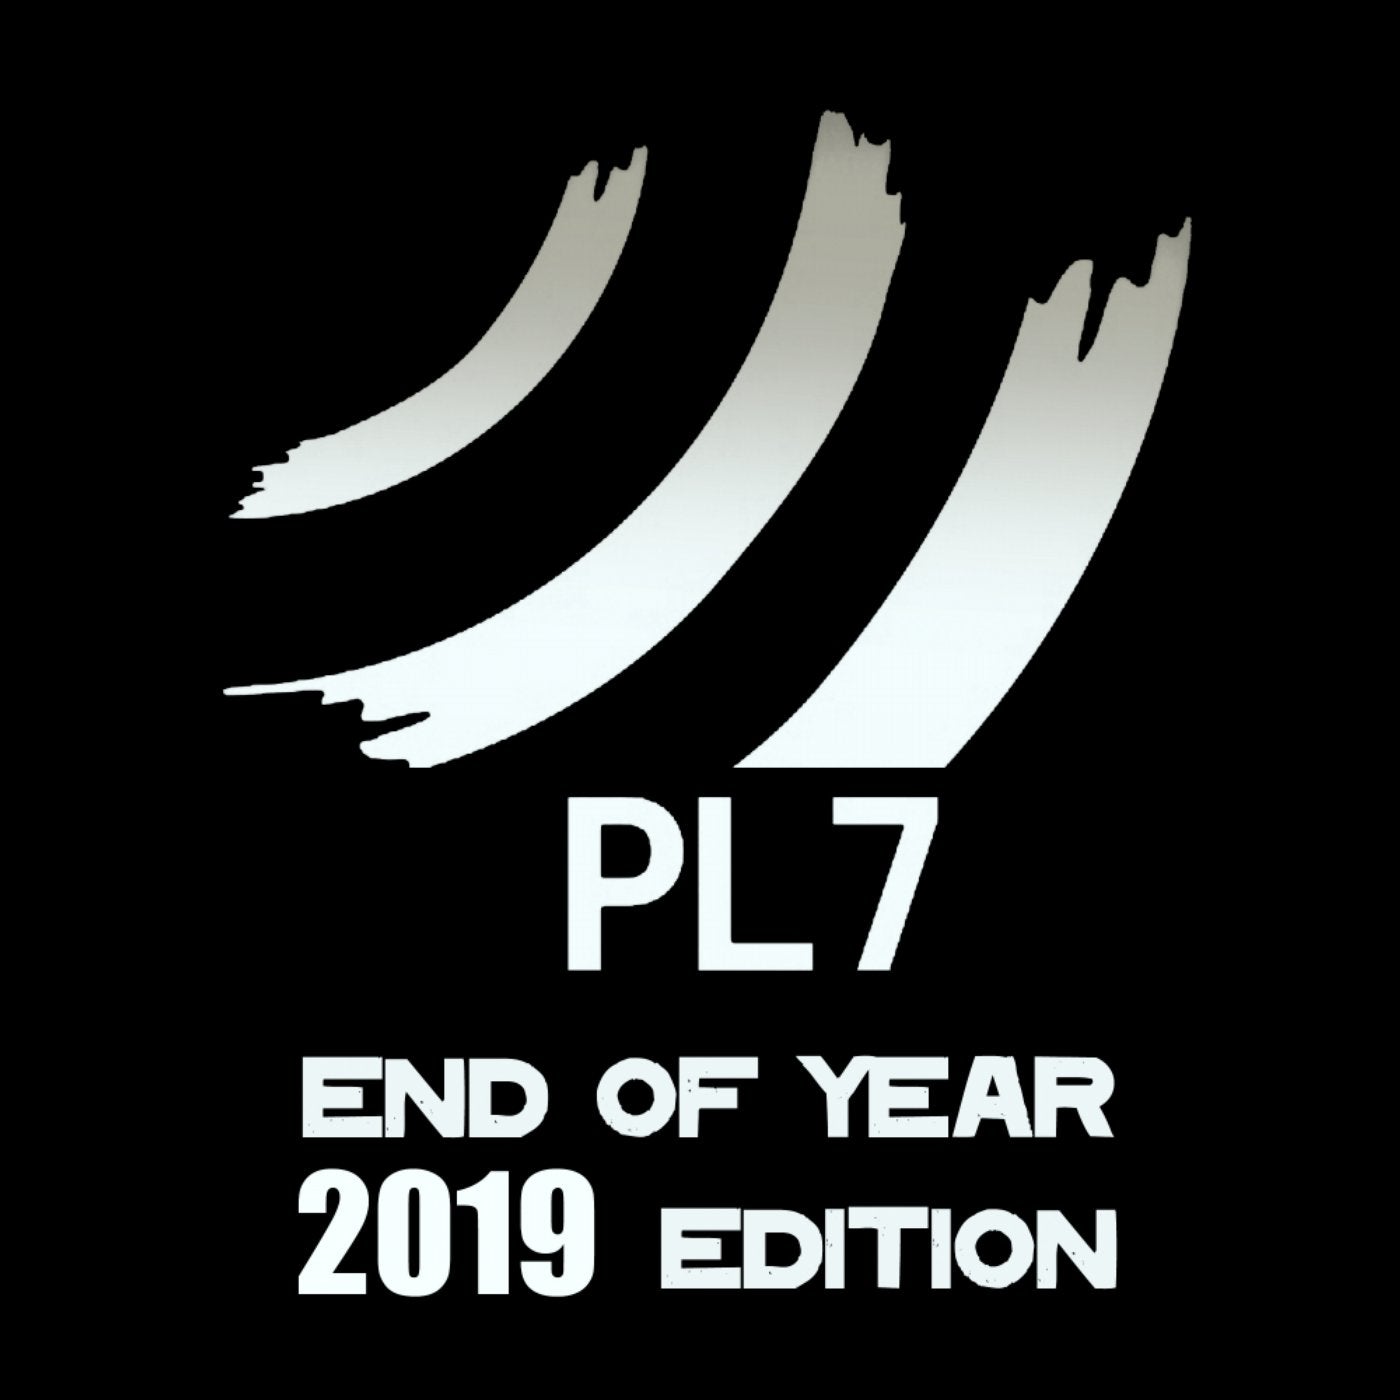 PL7 END OF YEAR 2019 EDITION